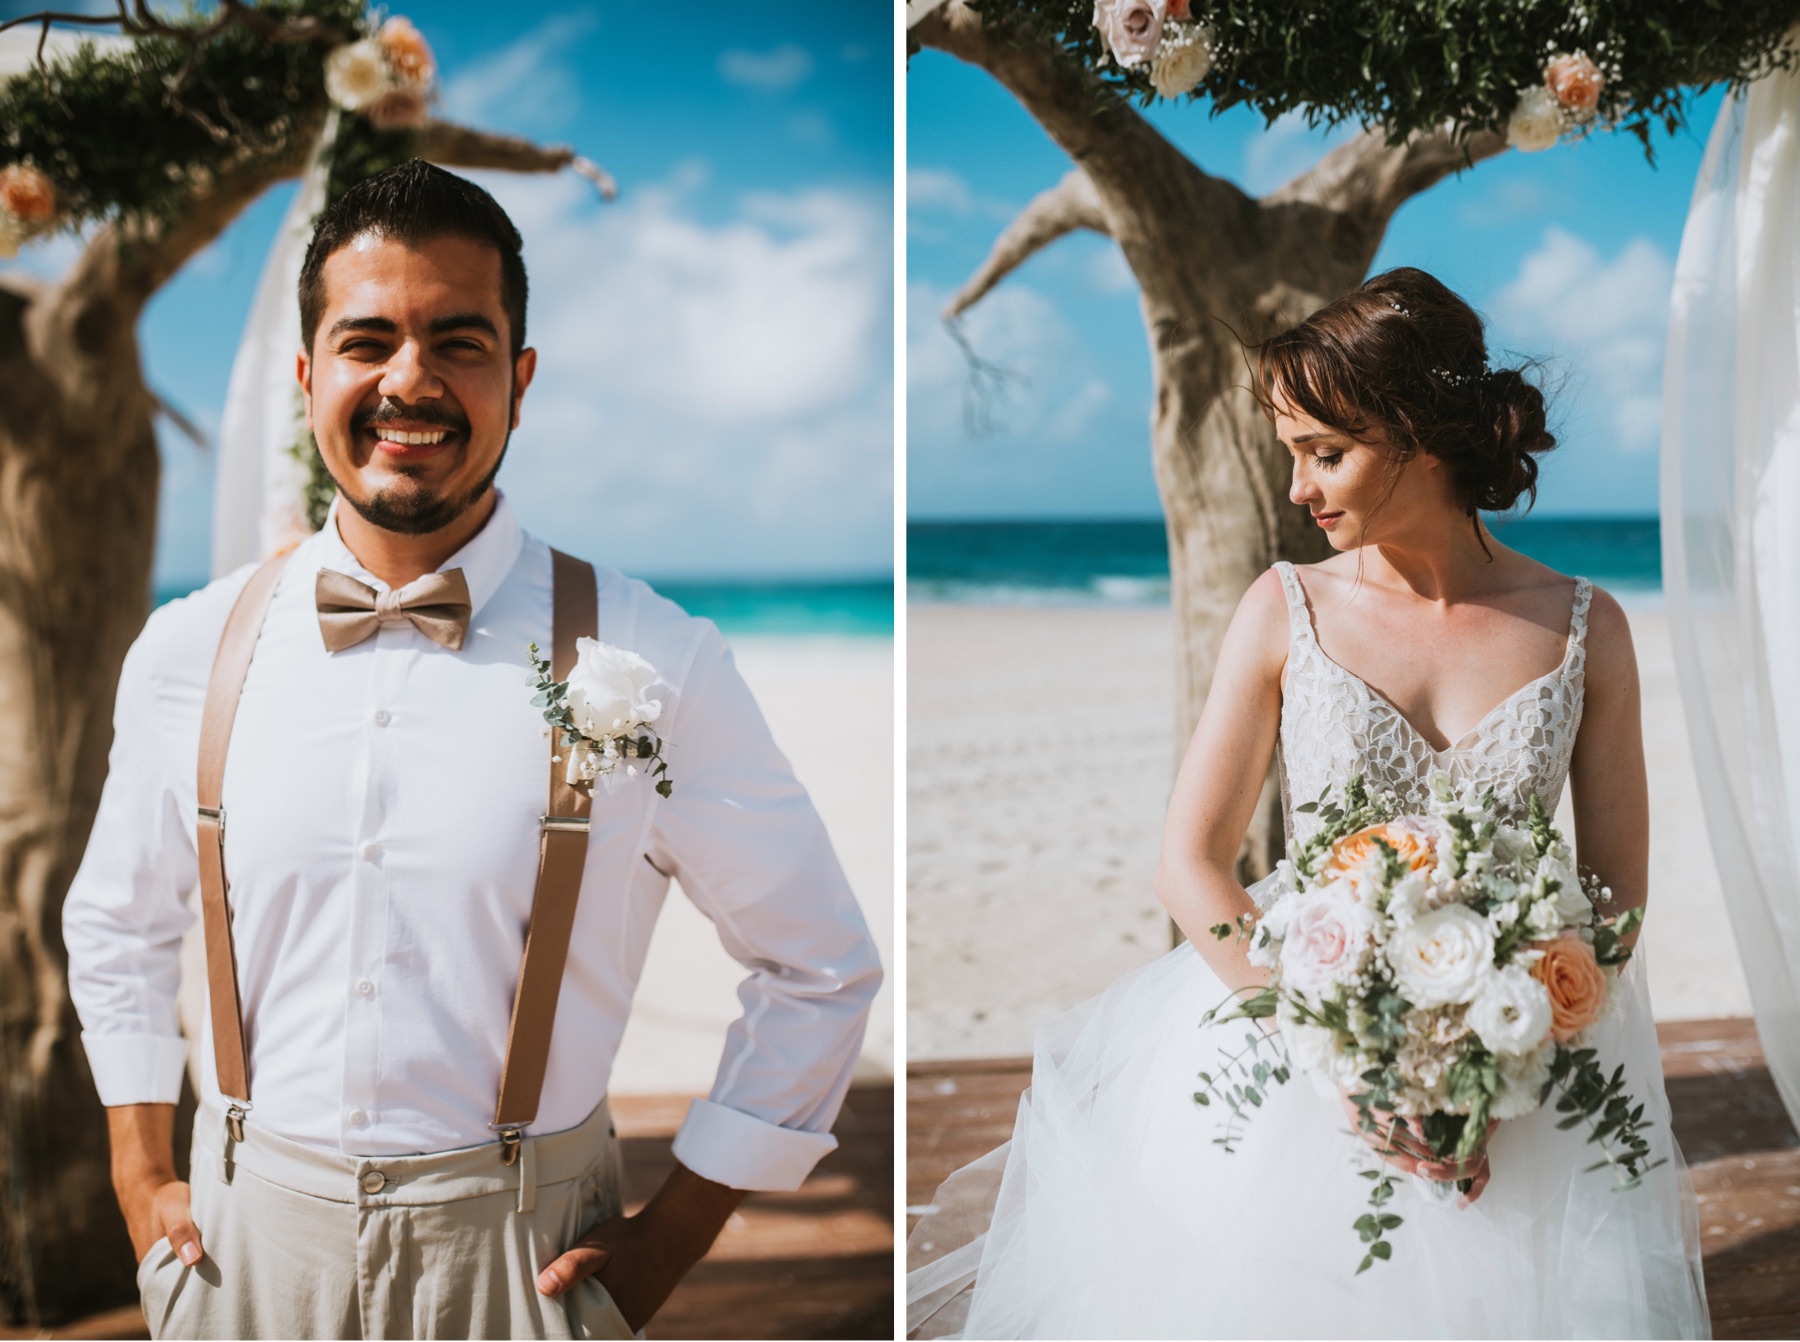 Side by side photos of bride and groom with their flowers standing in front of arch